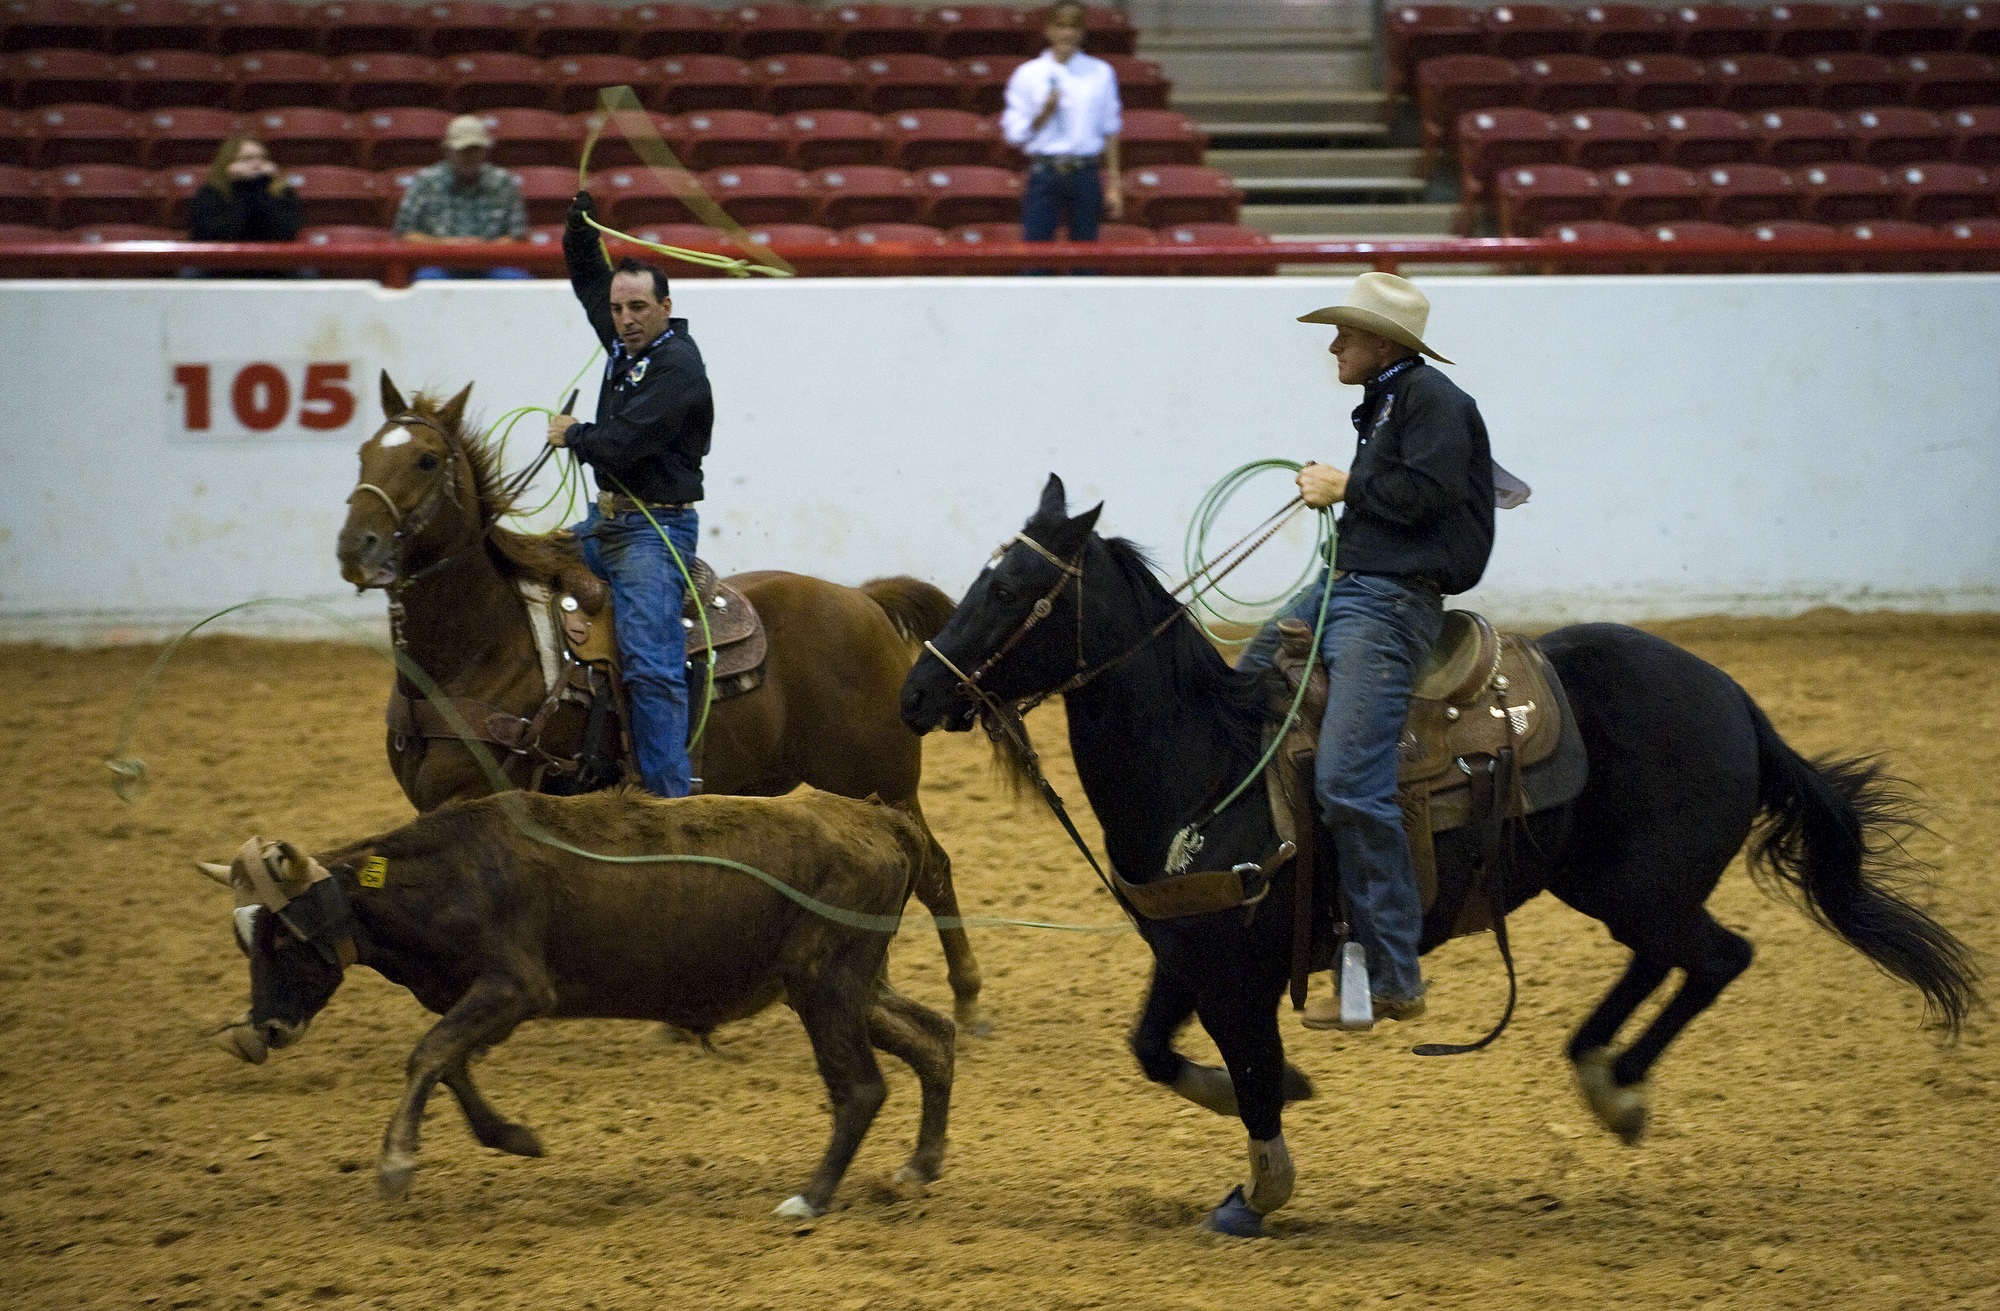 Riders in the Ring, Activity, Bull, Deadly, Horse, HQ Photo